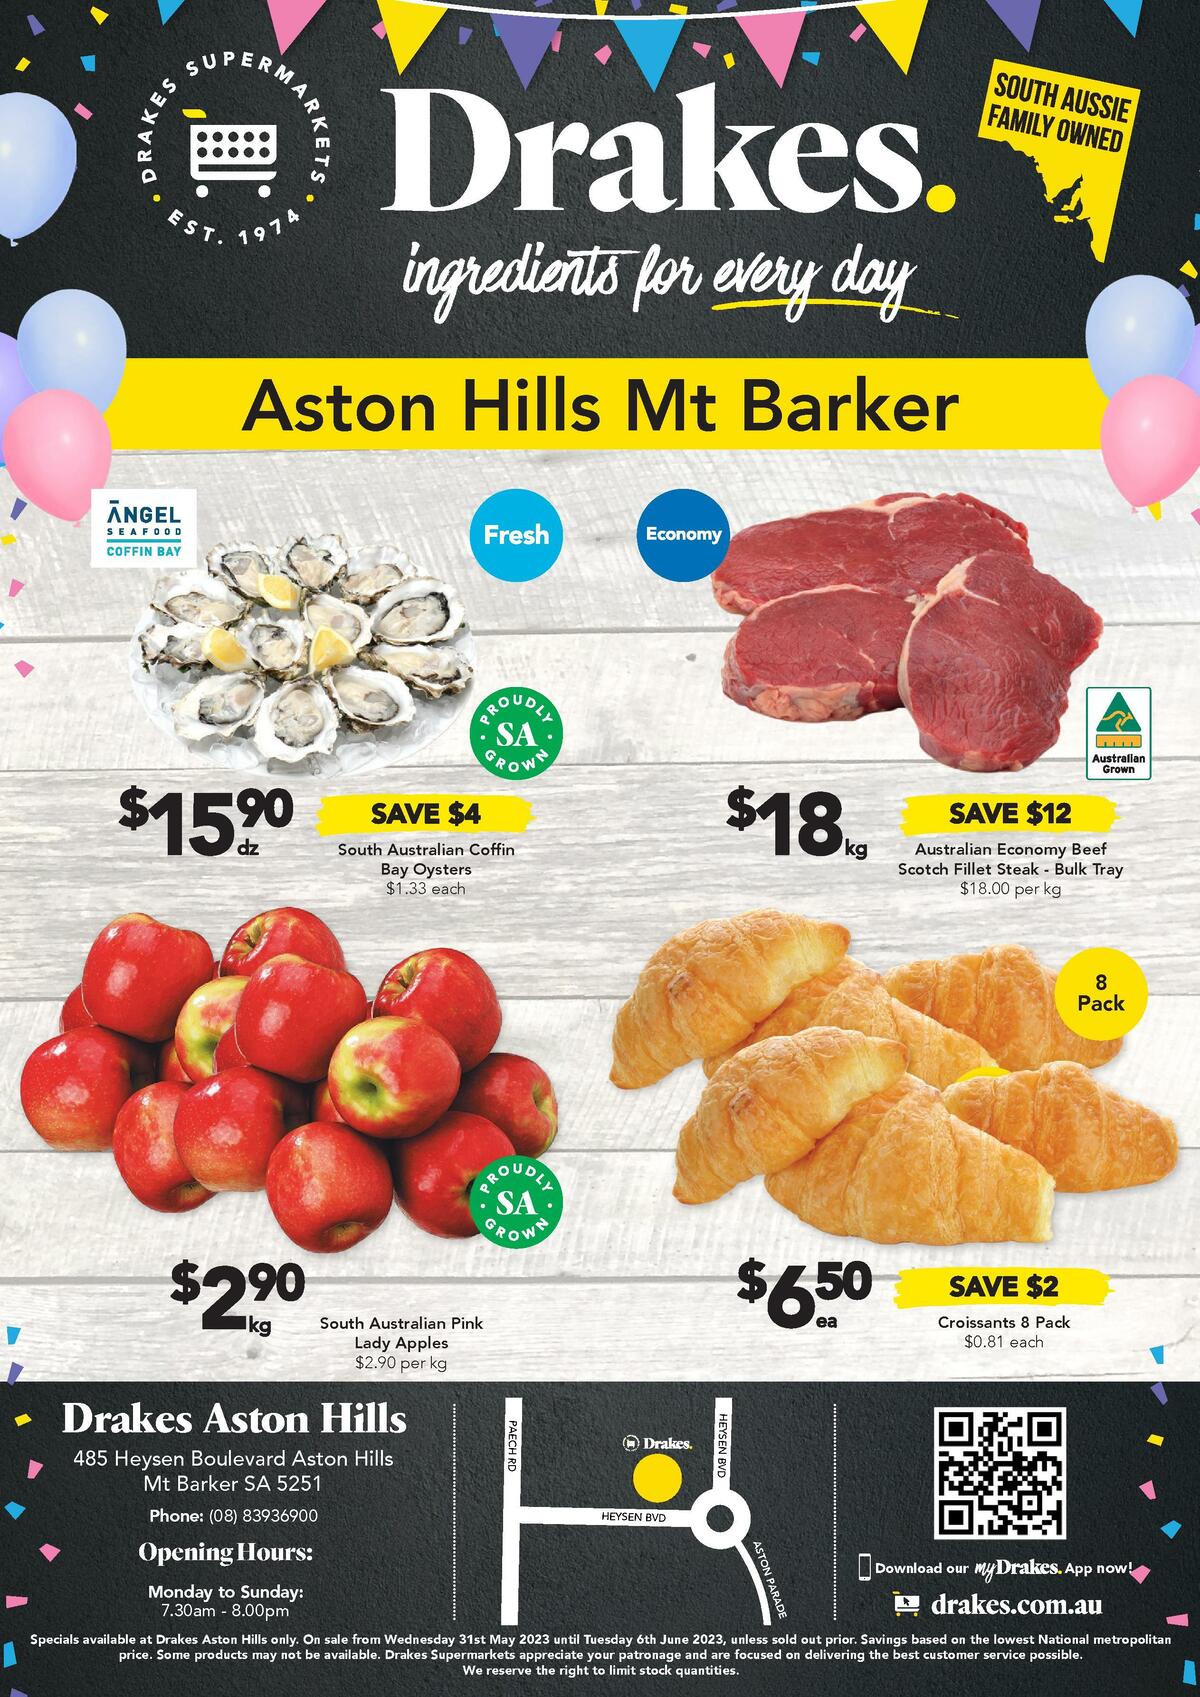 Drakes Aston Hills, Mt Barker Catalogues from 31 May